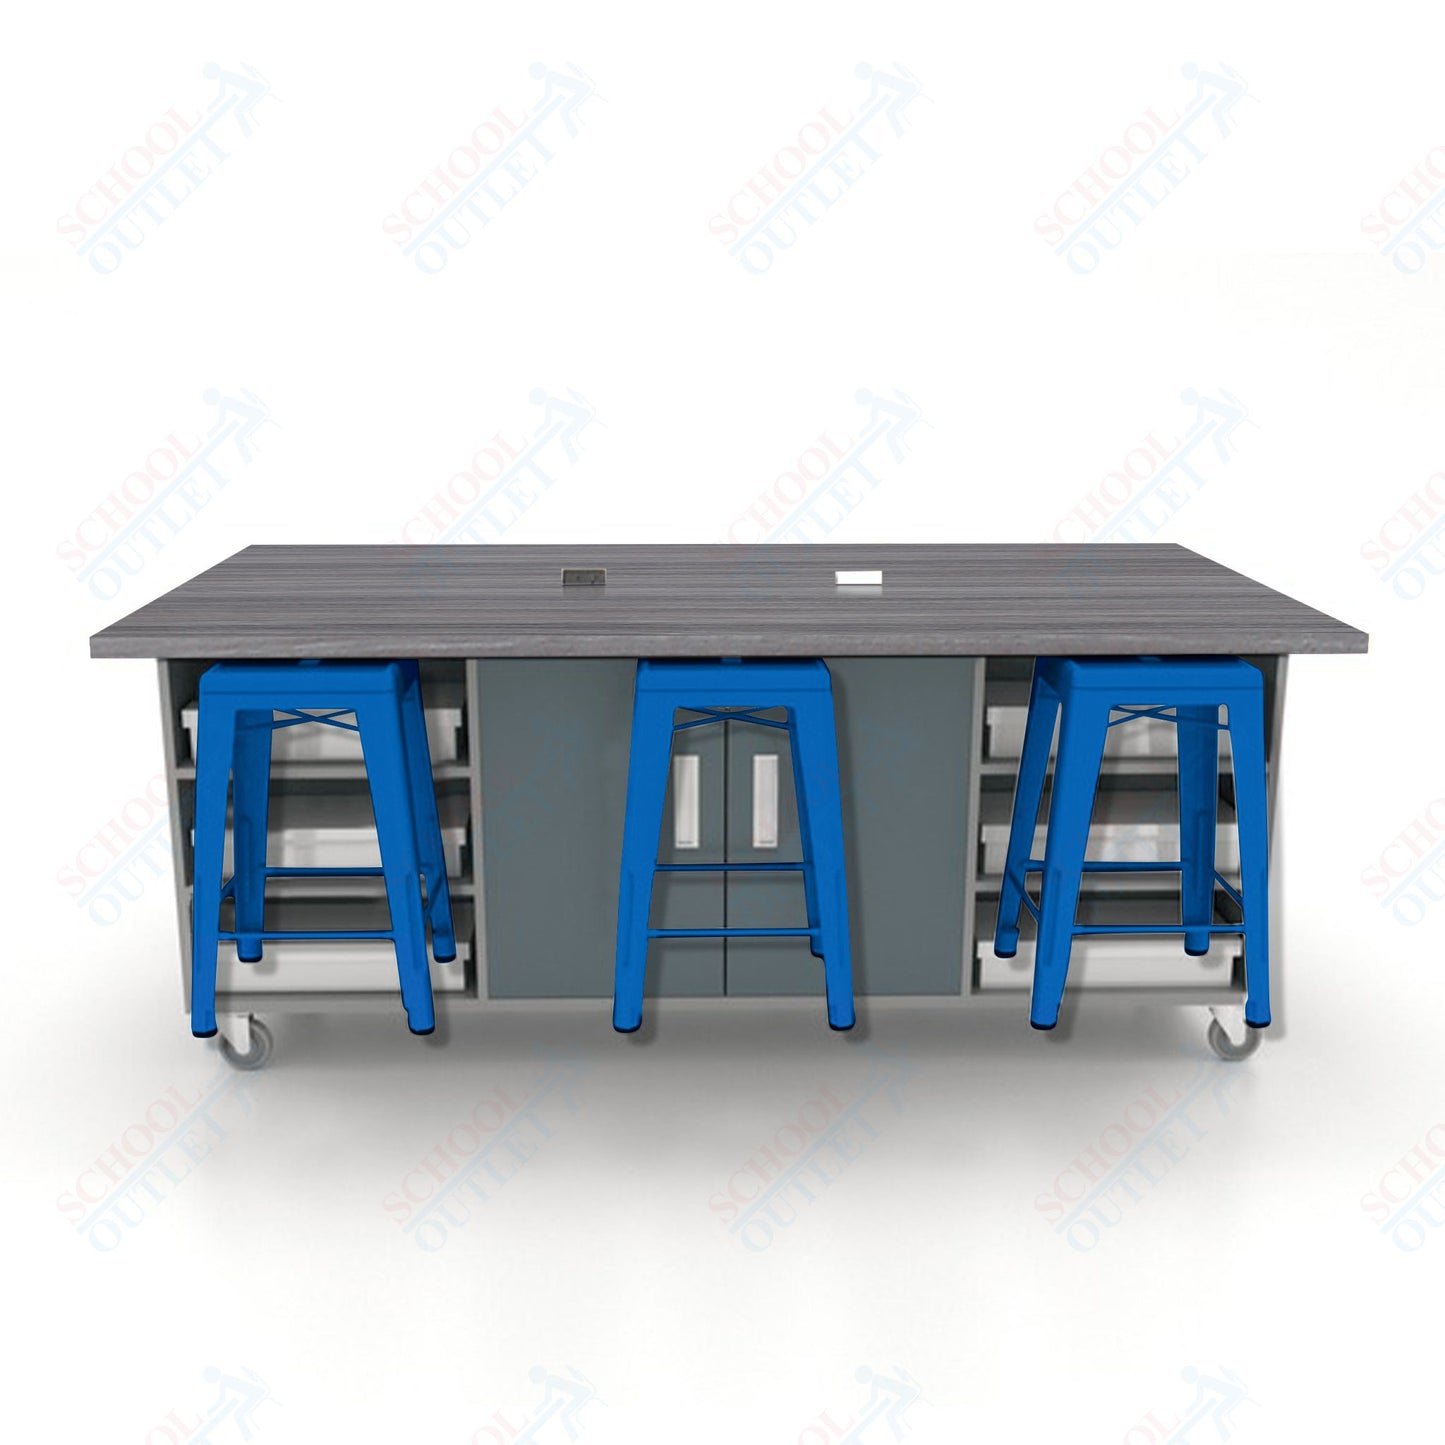 CEF ED Double Table 36"H High Pressure Laminate Top, Laminate Base with  6 Stools, Storage bins, and Electrical Outlets Included.